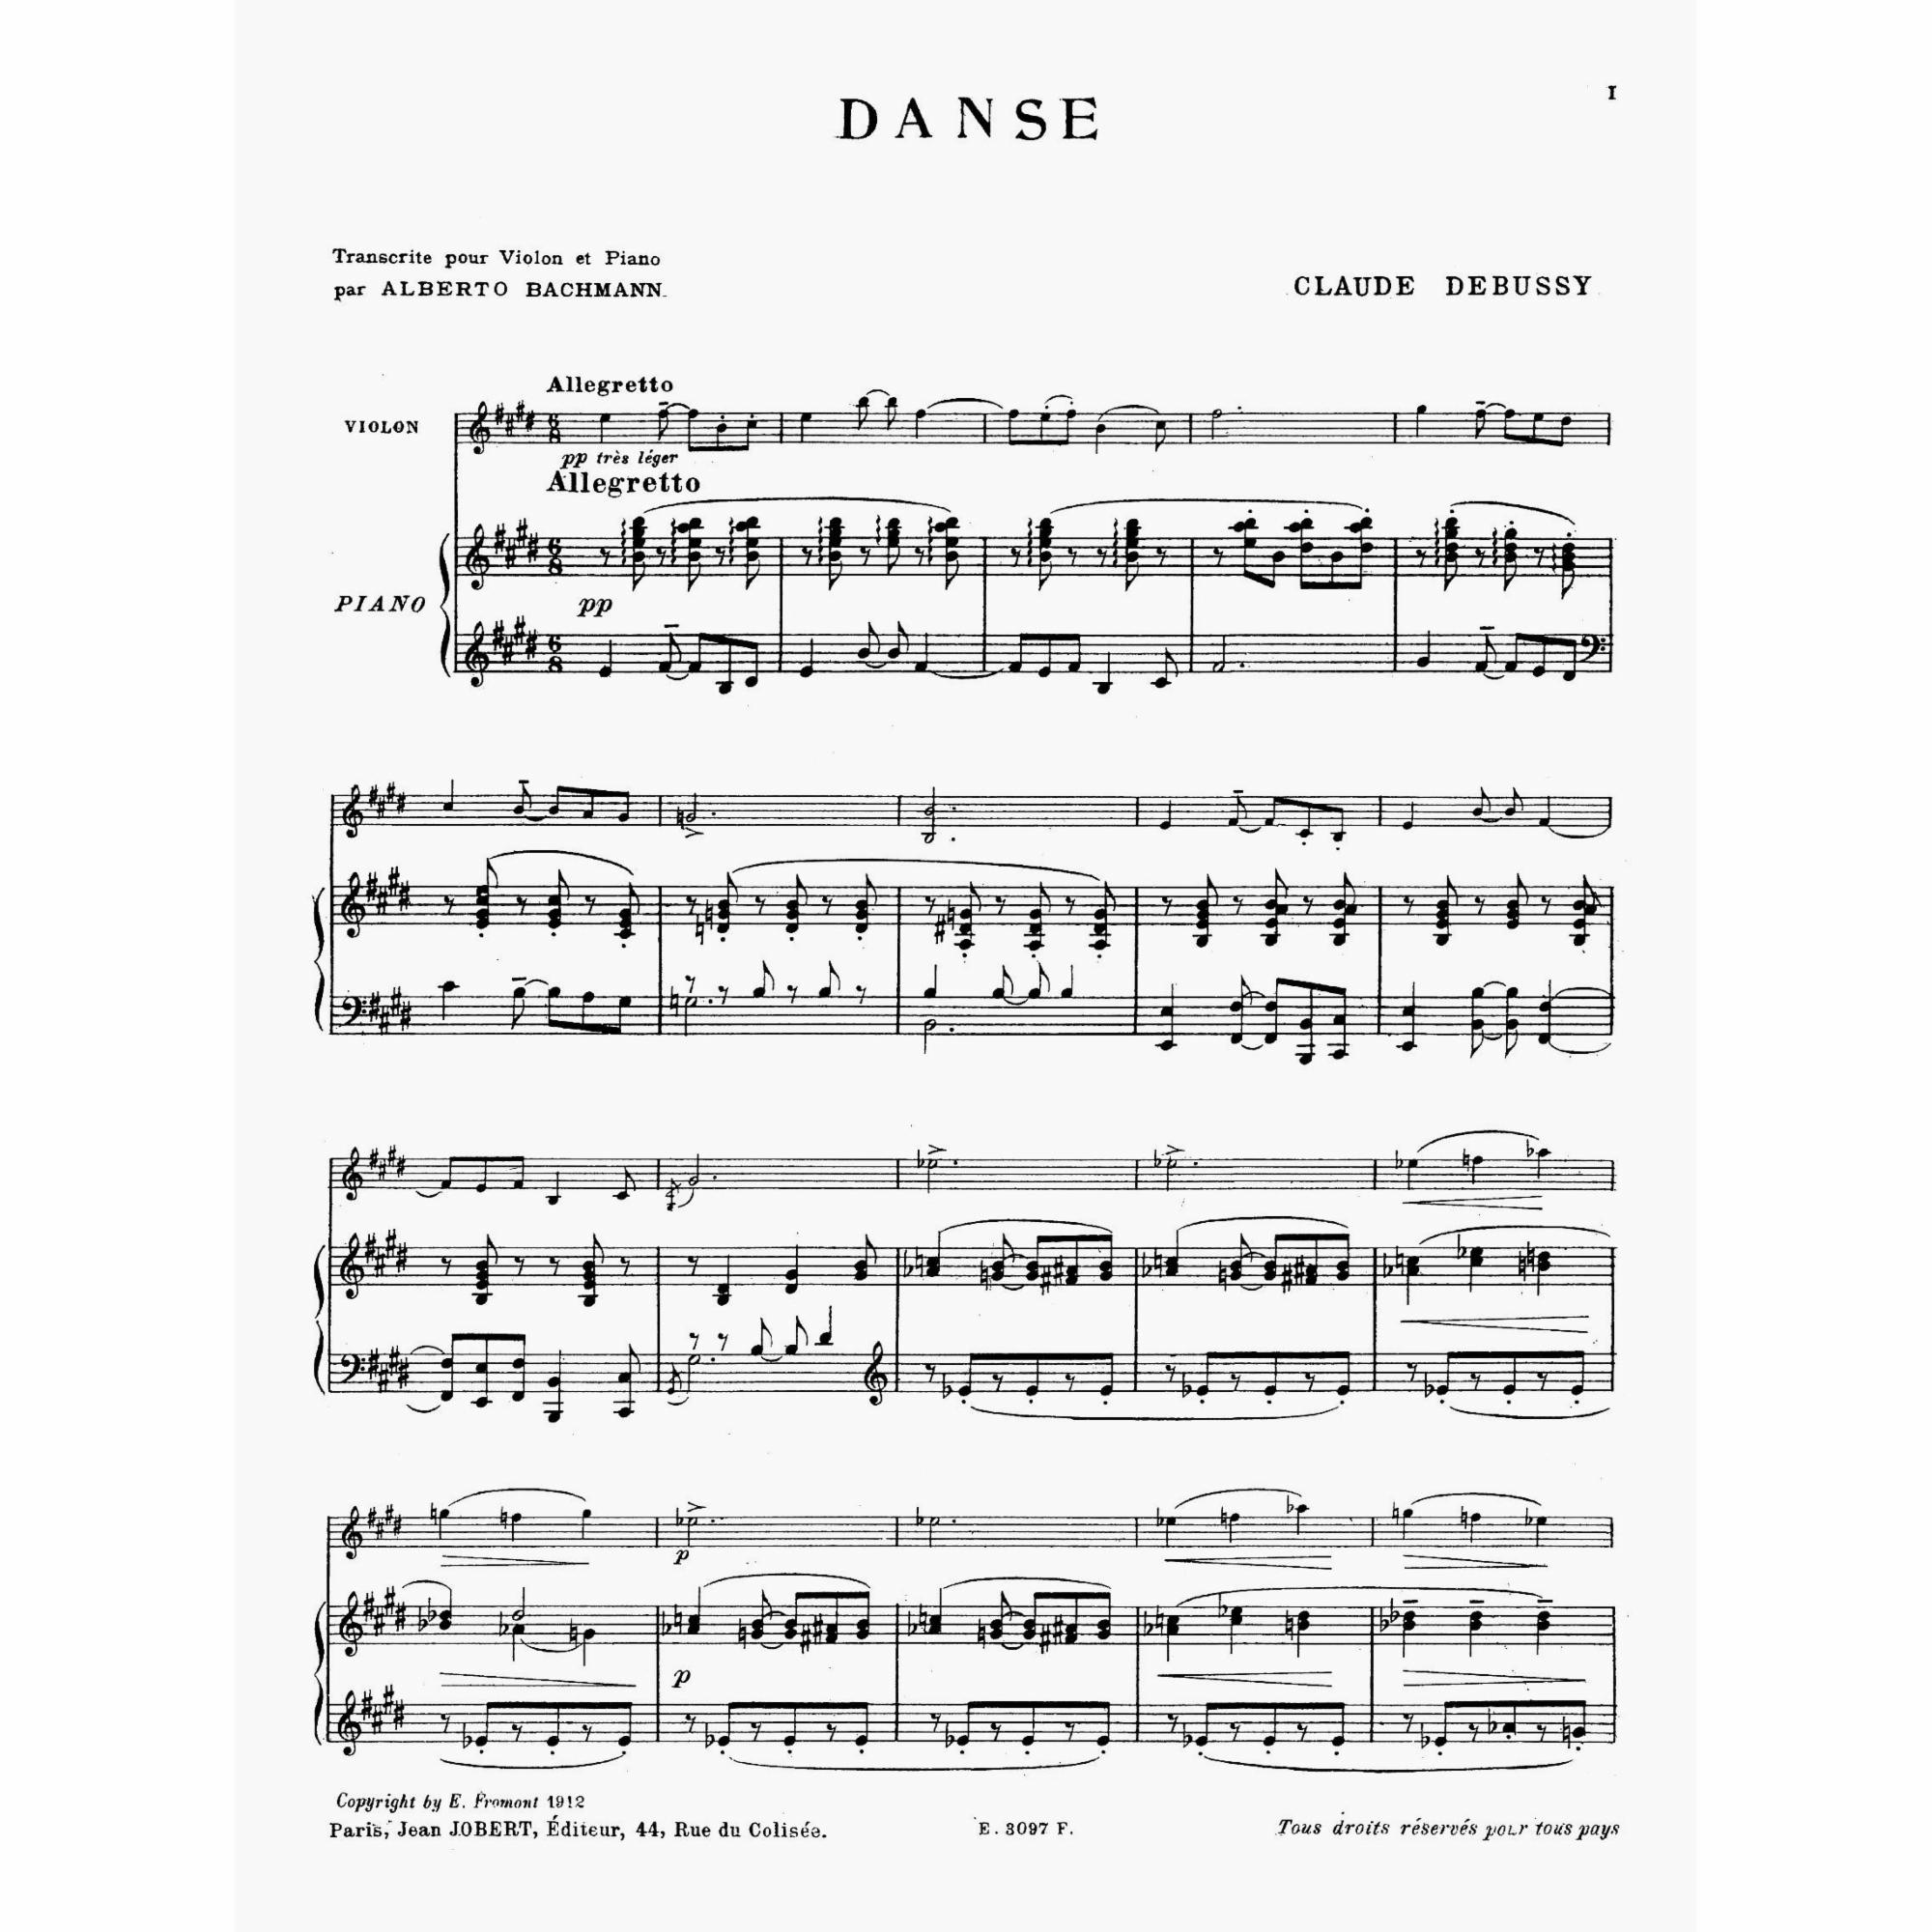 Debussy -- Danse for Violin and Piano | Southwest Strings